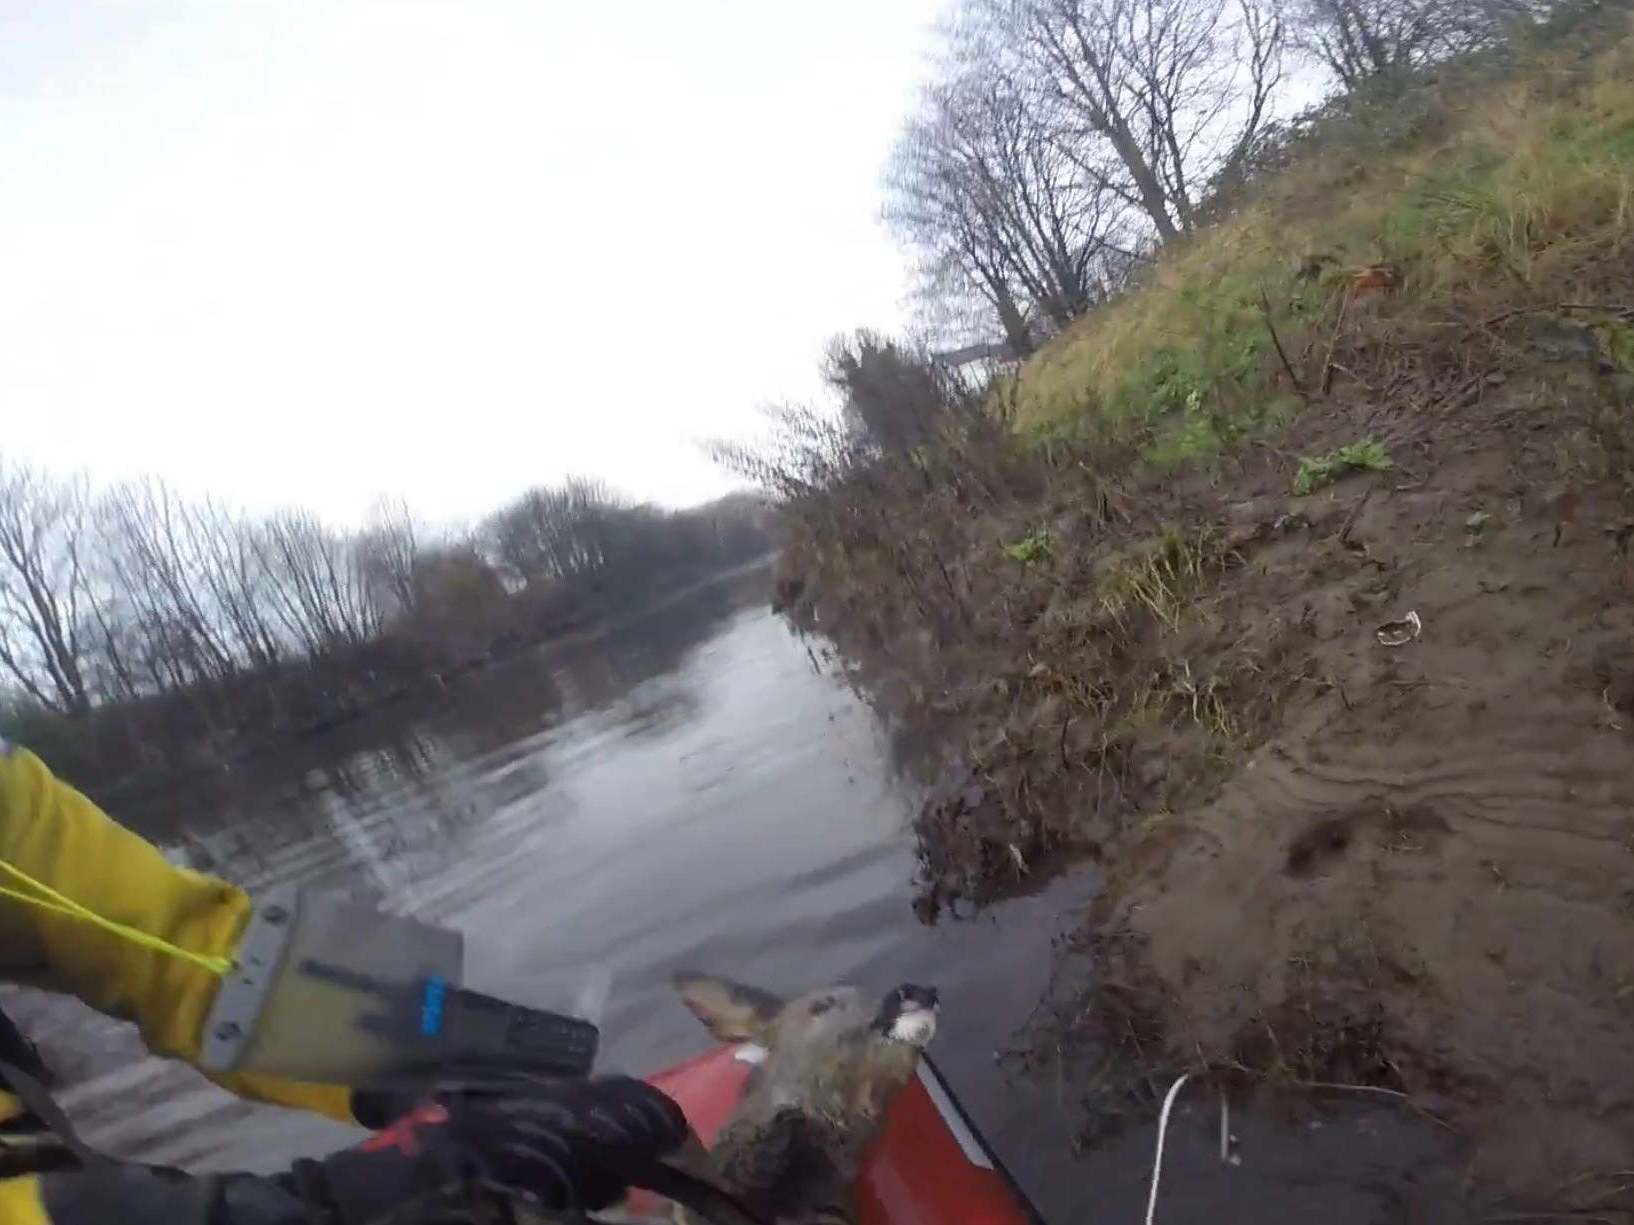 RSPCA water rescue team saves four roe deer stuck on a piece of land at the side of the River Irwell in Salford, Greater Manchester, 17 December 2019.